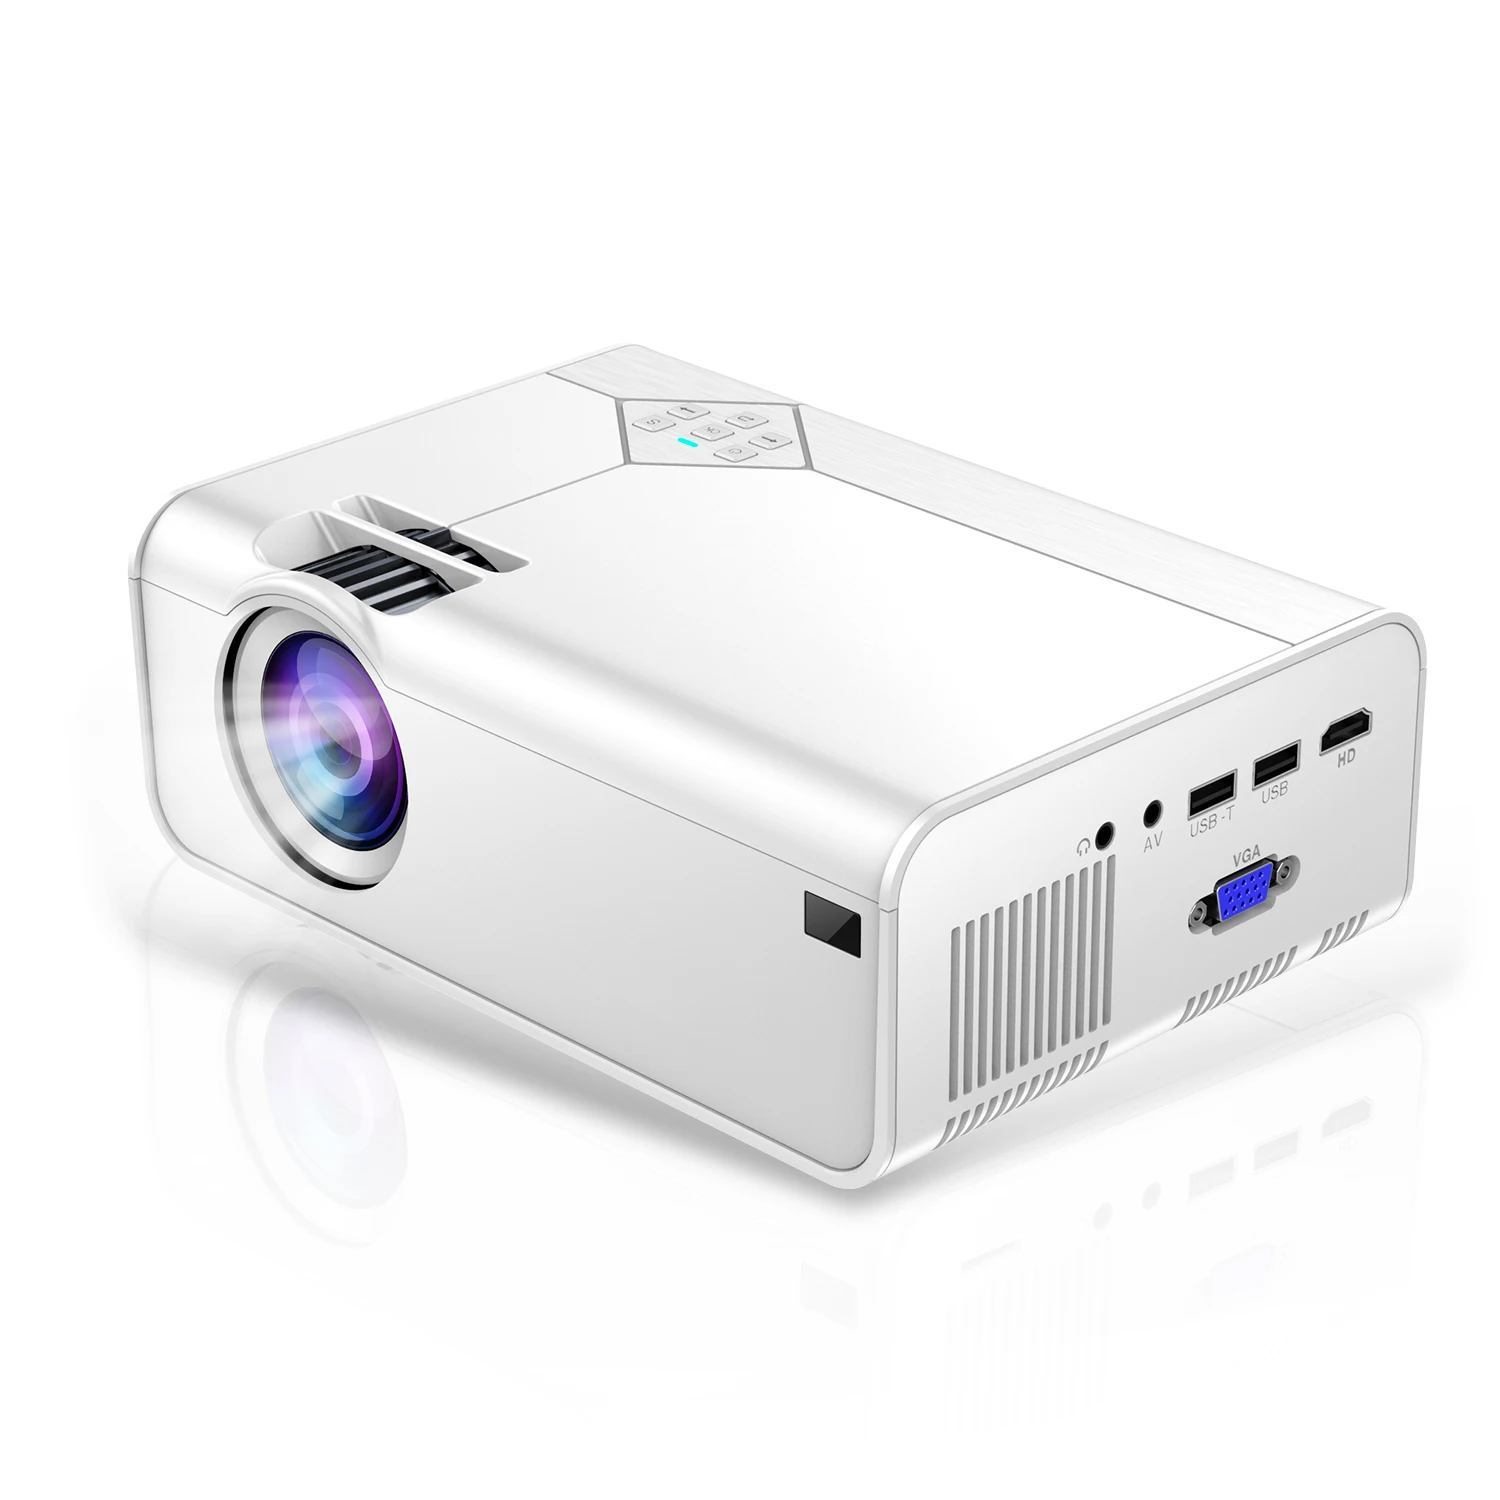 dictator Monografie Grillig Private Label Hd Mini Smart Led Projector Wireless Games Beamer 3 In 1 3d  Video Proyector For Home Cinema Outdoor - Buy Mini Projector 4k,Smartphone  Projector,Gaming Projector Product on Alibaba.com